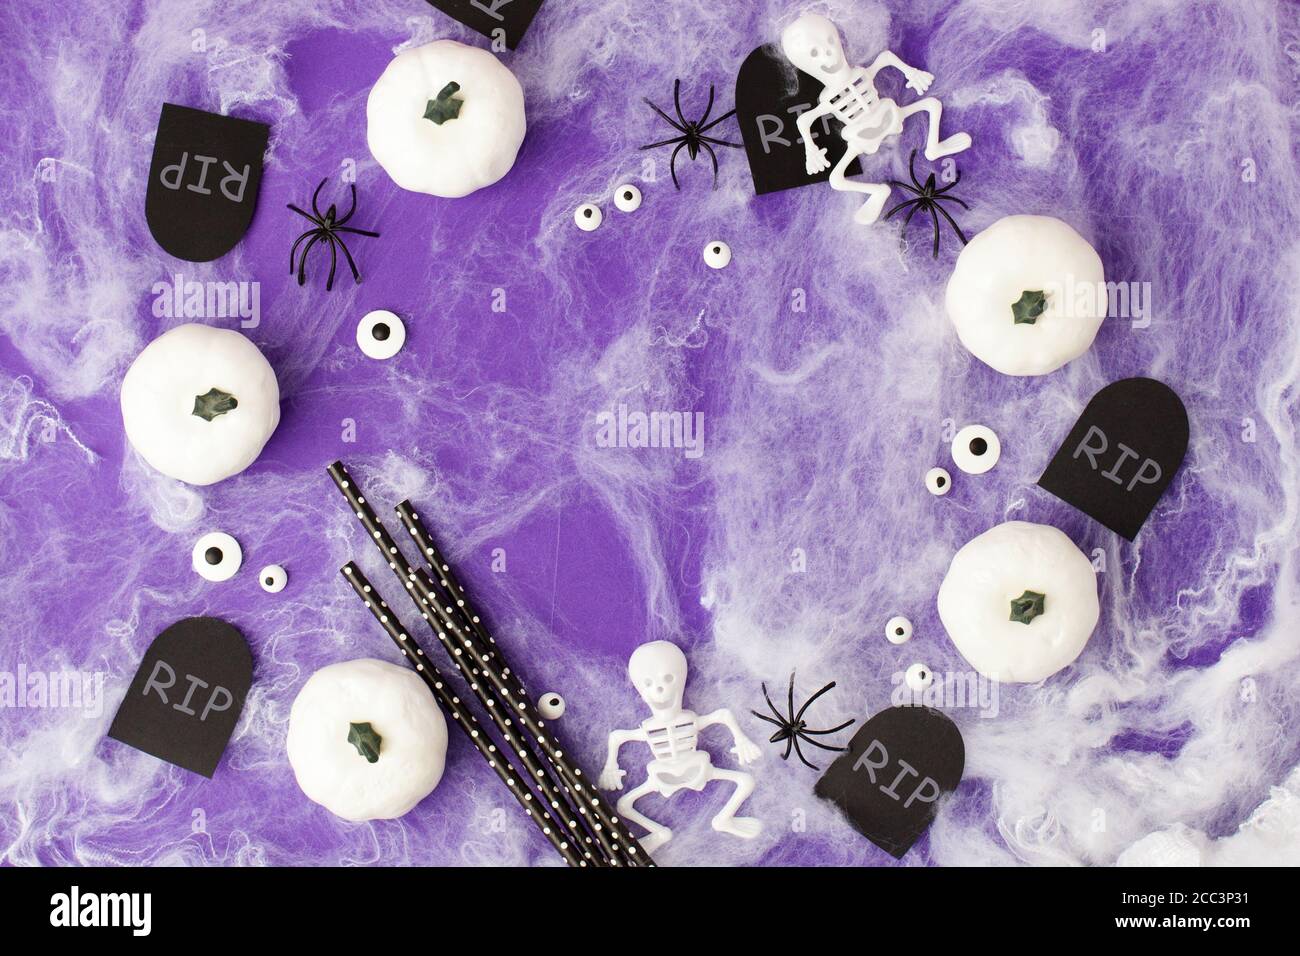 Halloween holiday blank with party decor, black spiders, white pumpkins, skeletons, eadstone rip, eyes, web on traditional purple. Flat lay, top view. Stock Photo